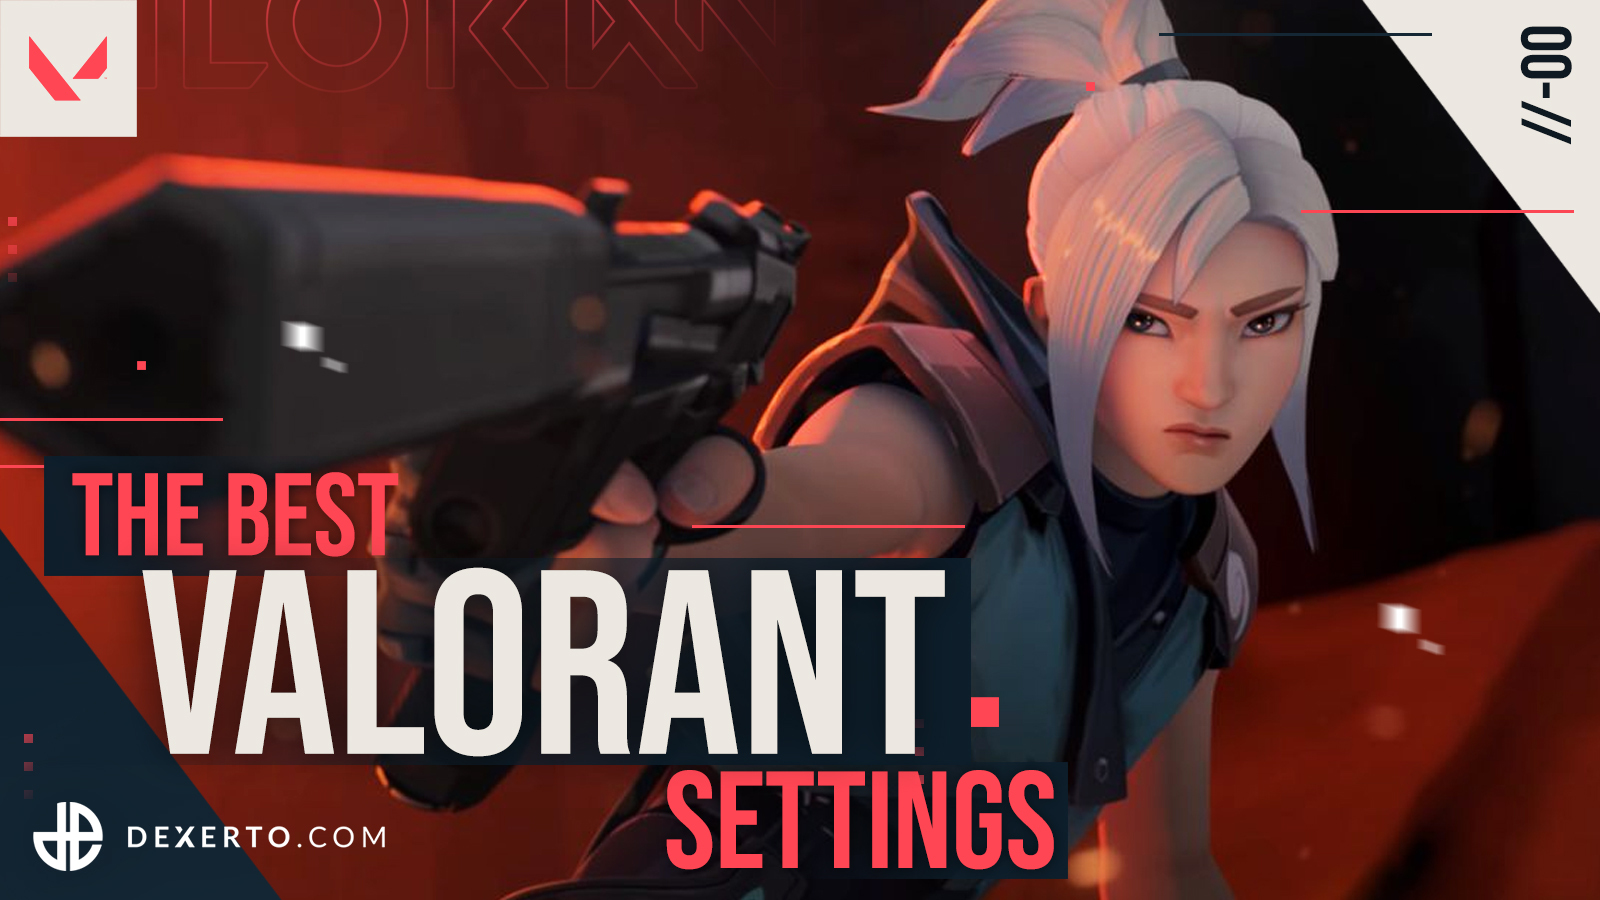 A Guide to the Best Valorant Settings